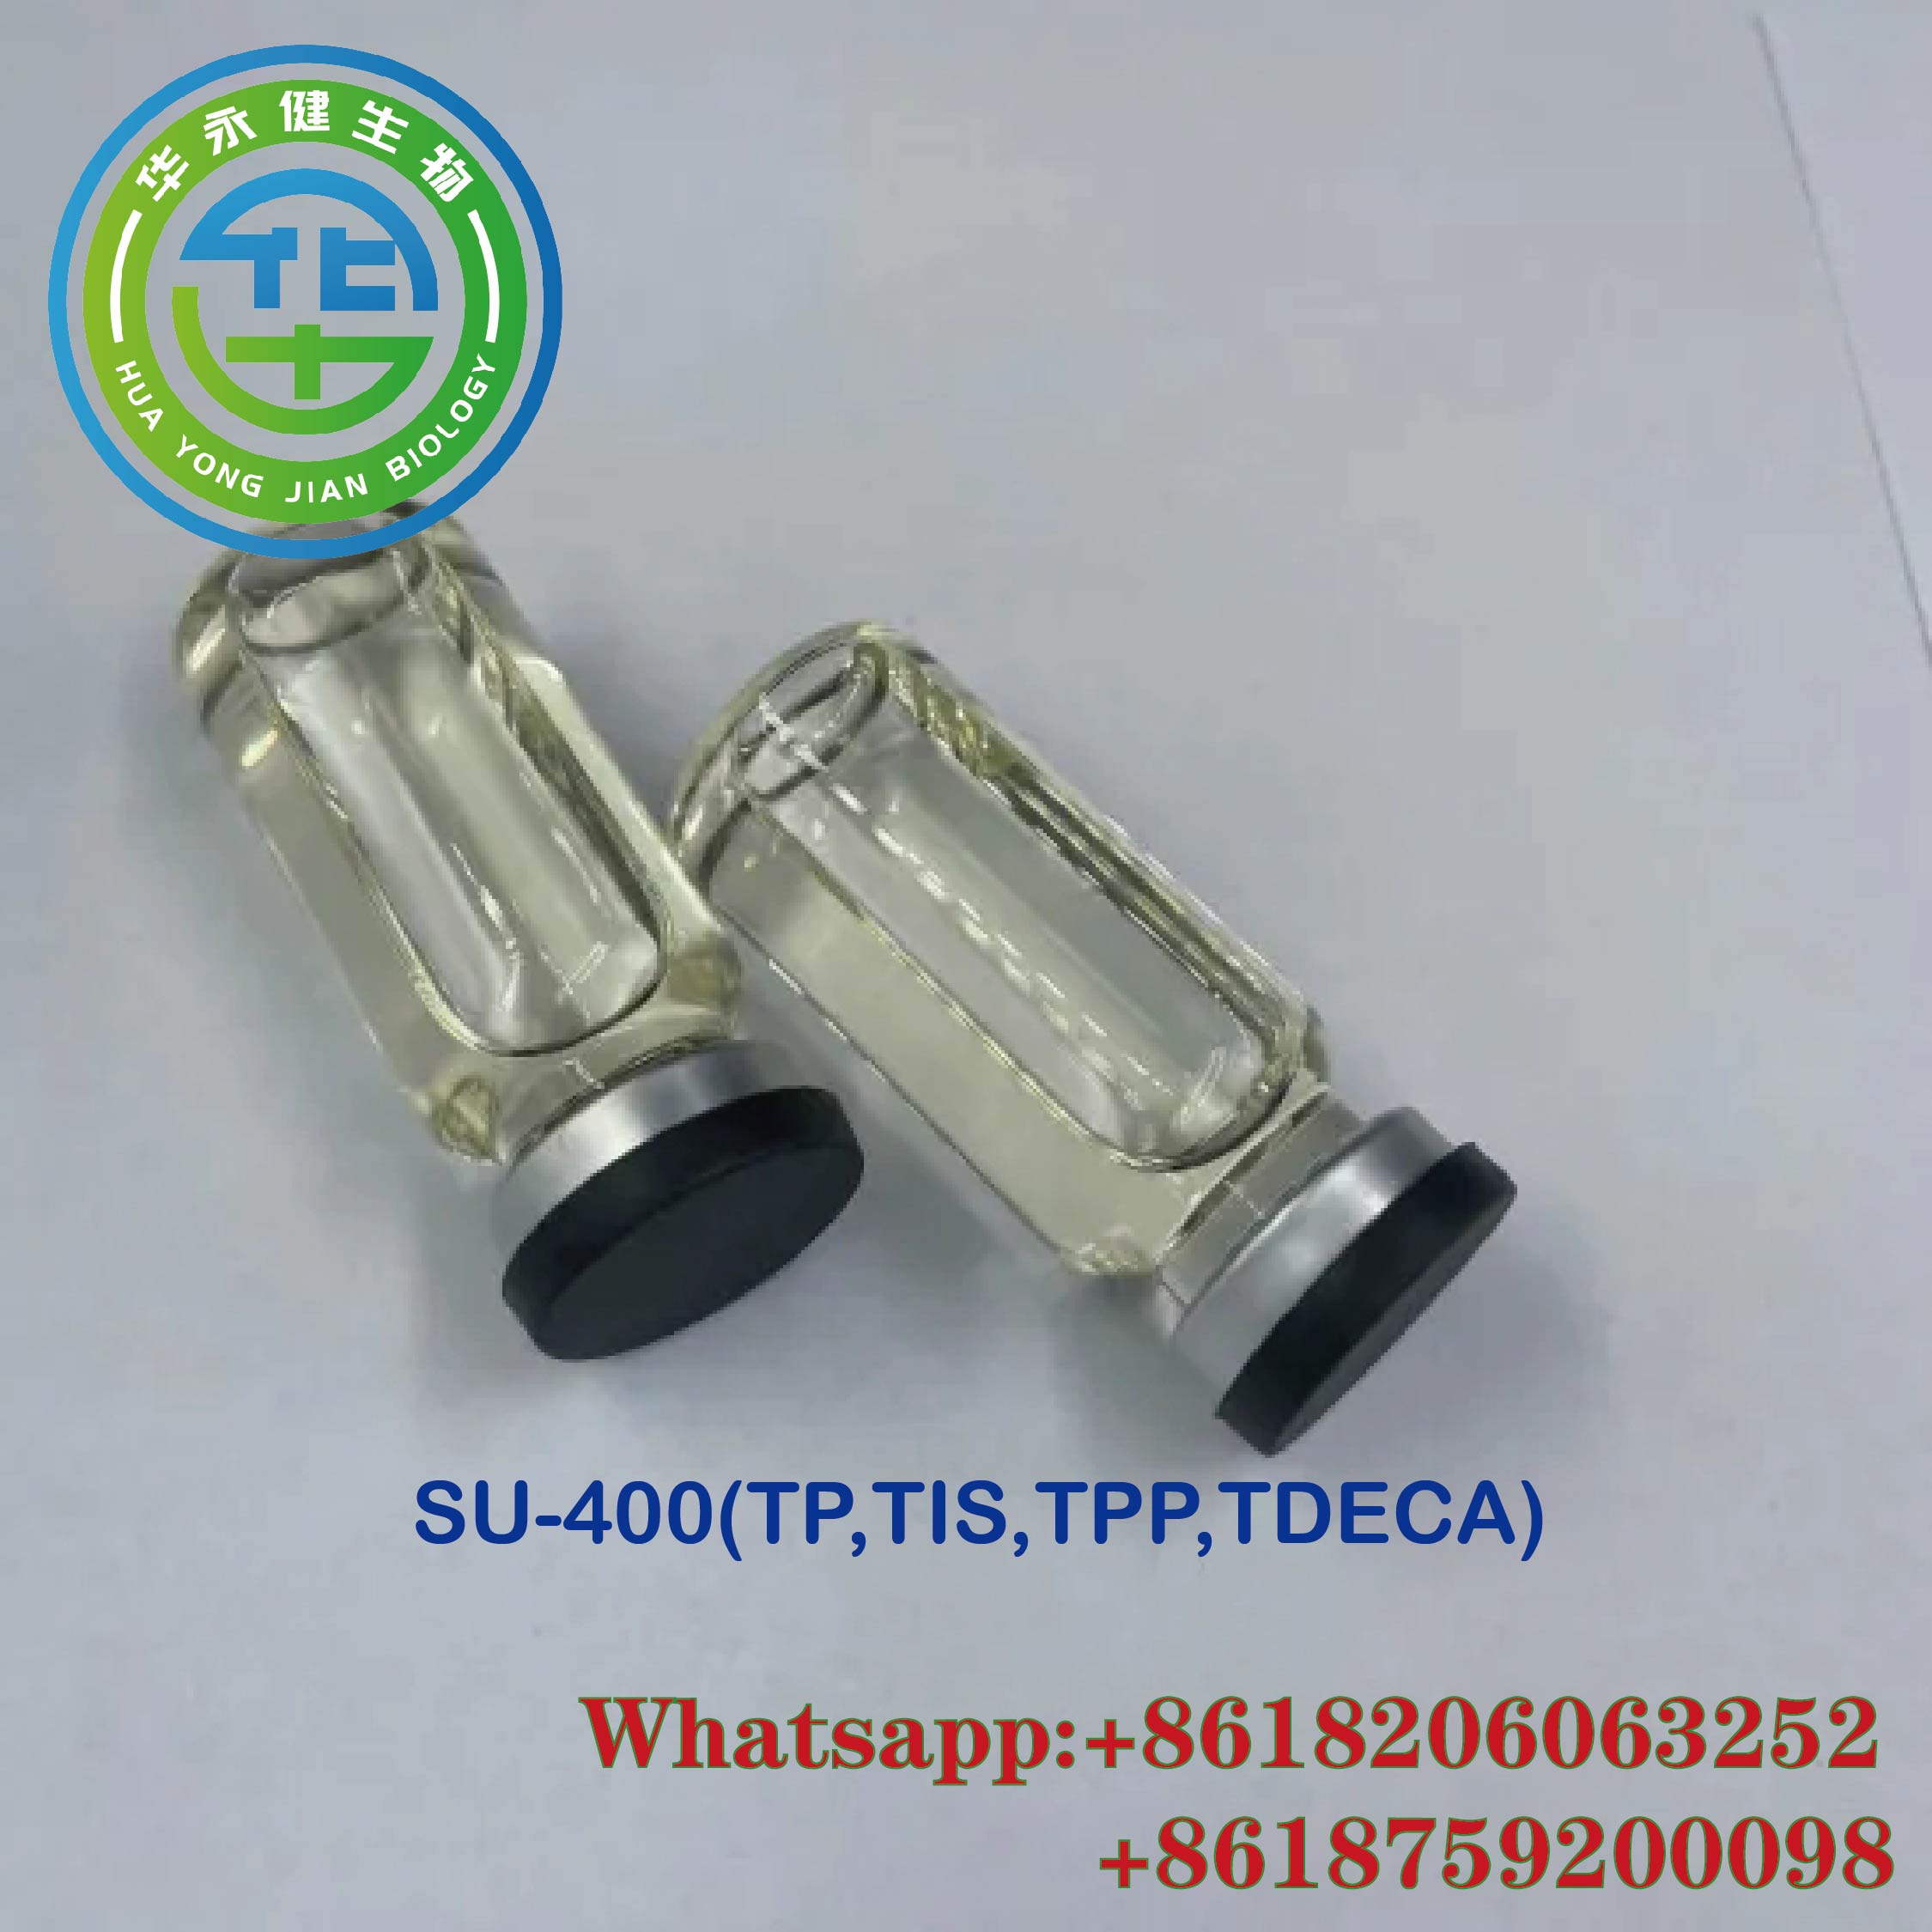 Wholesale Price Top Purity Testosterone Sustanon 400mg/ml Hormone Oil Finished Steroids Semi Finished Oil SU-400 